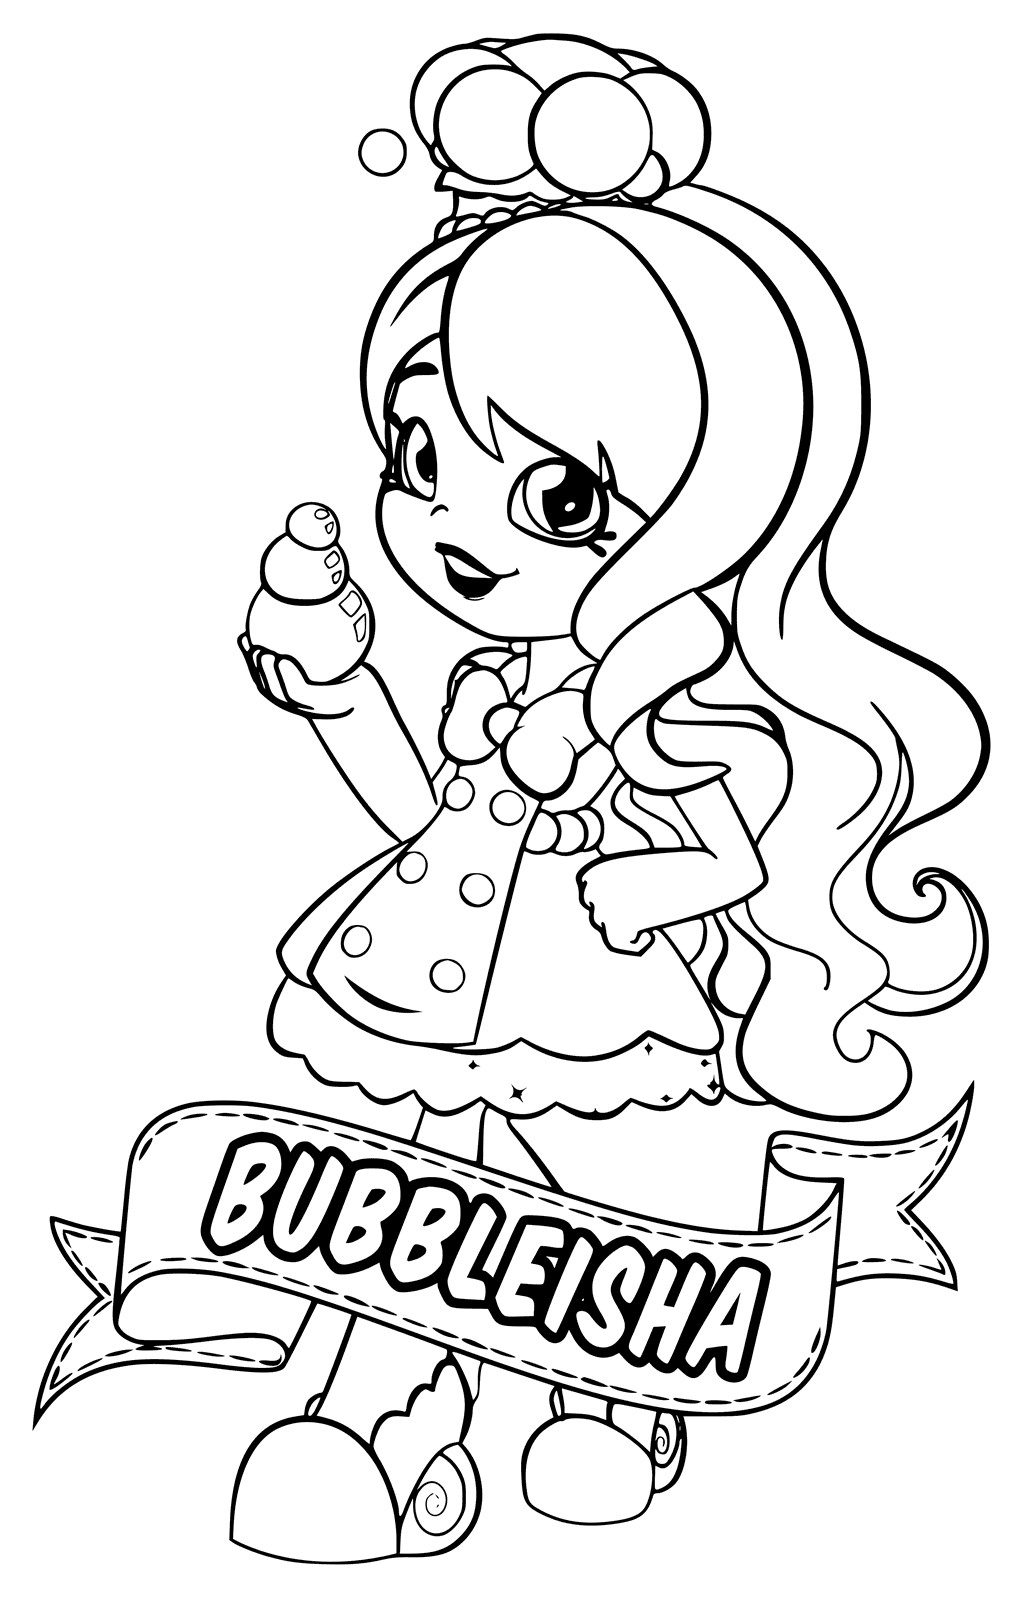 Shopkins Girls Coloring Pages
 Shoppies Coloring Pages coloringcks